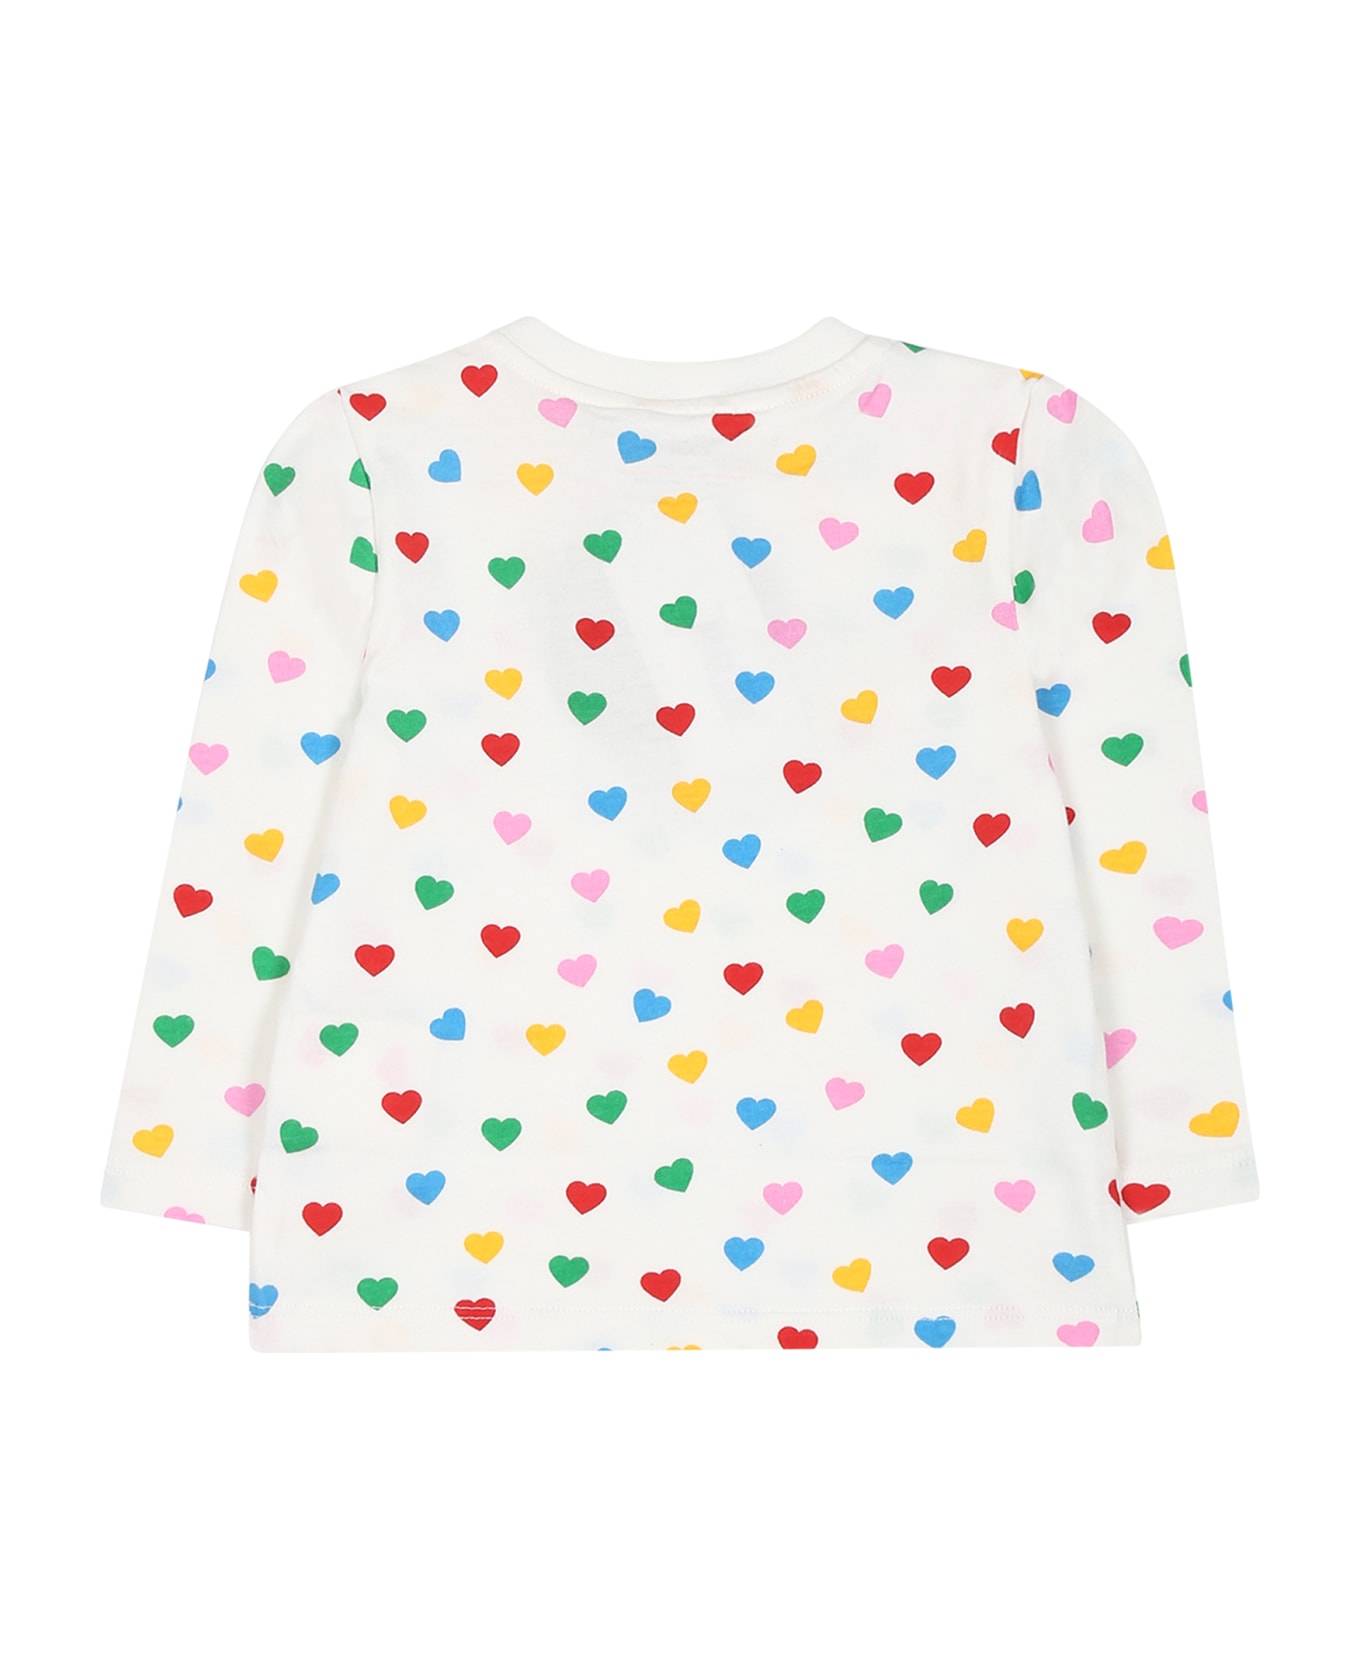 Stella McCartney Kids White T-shirt For Baby Girl With Hearts Print - White